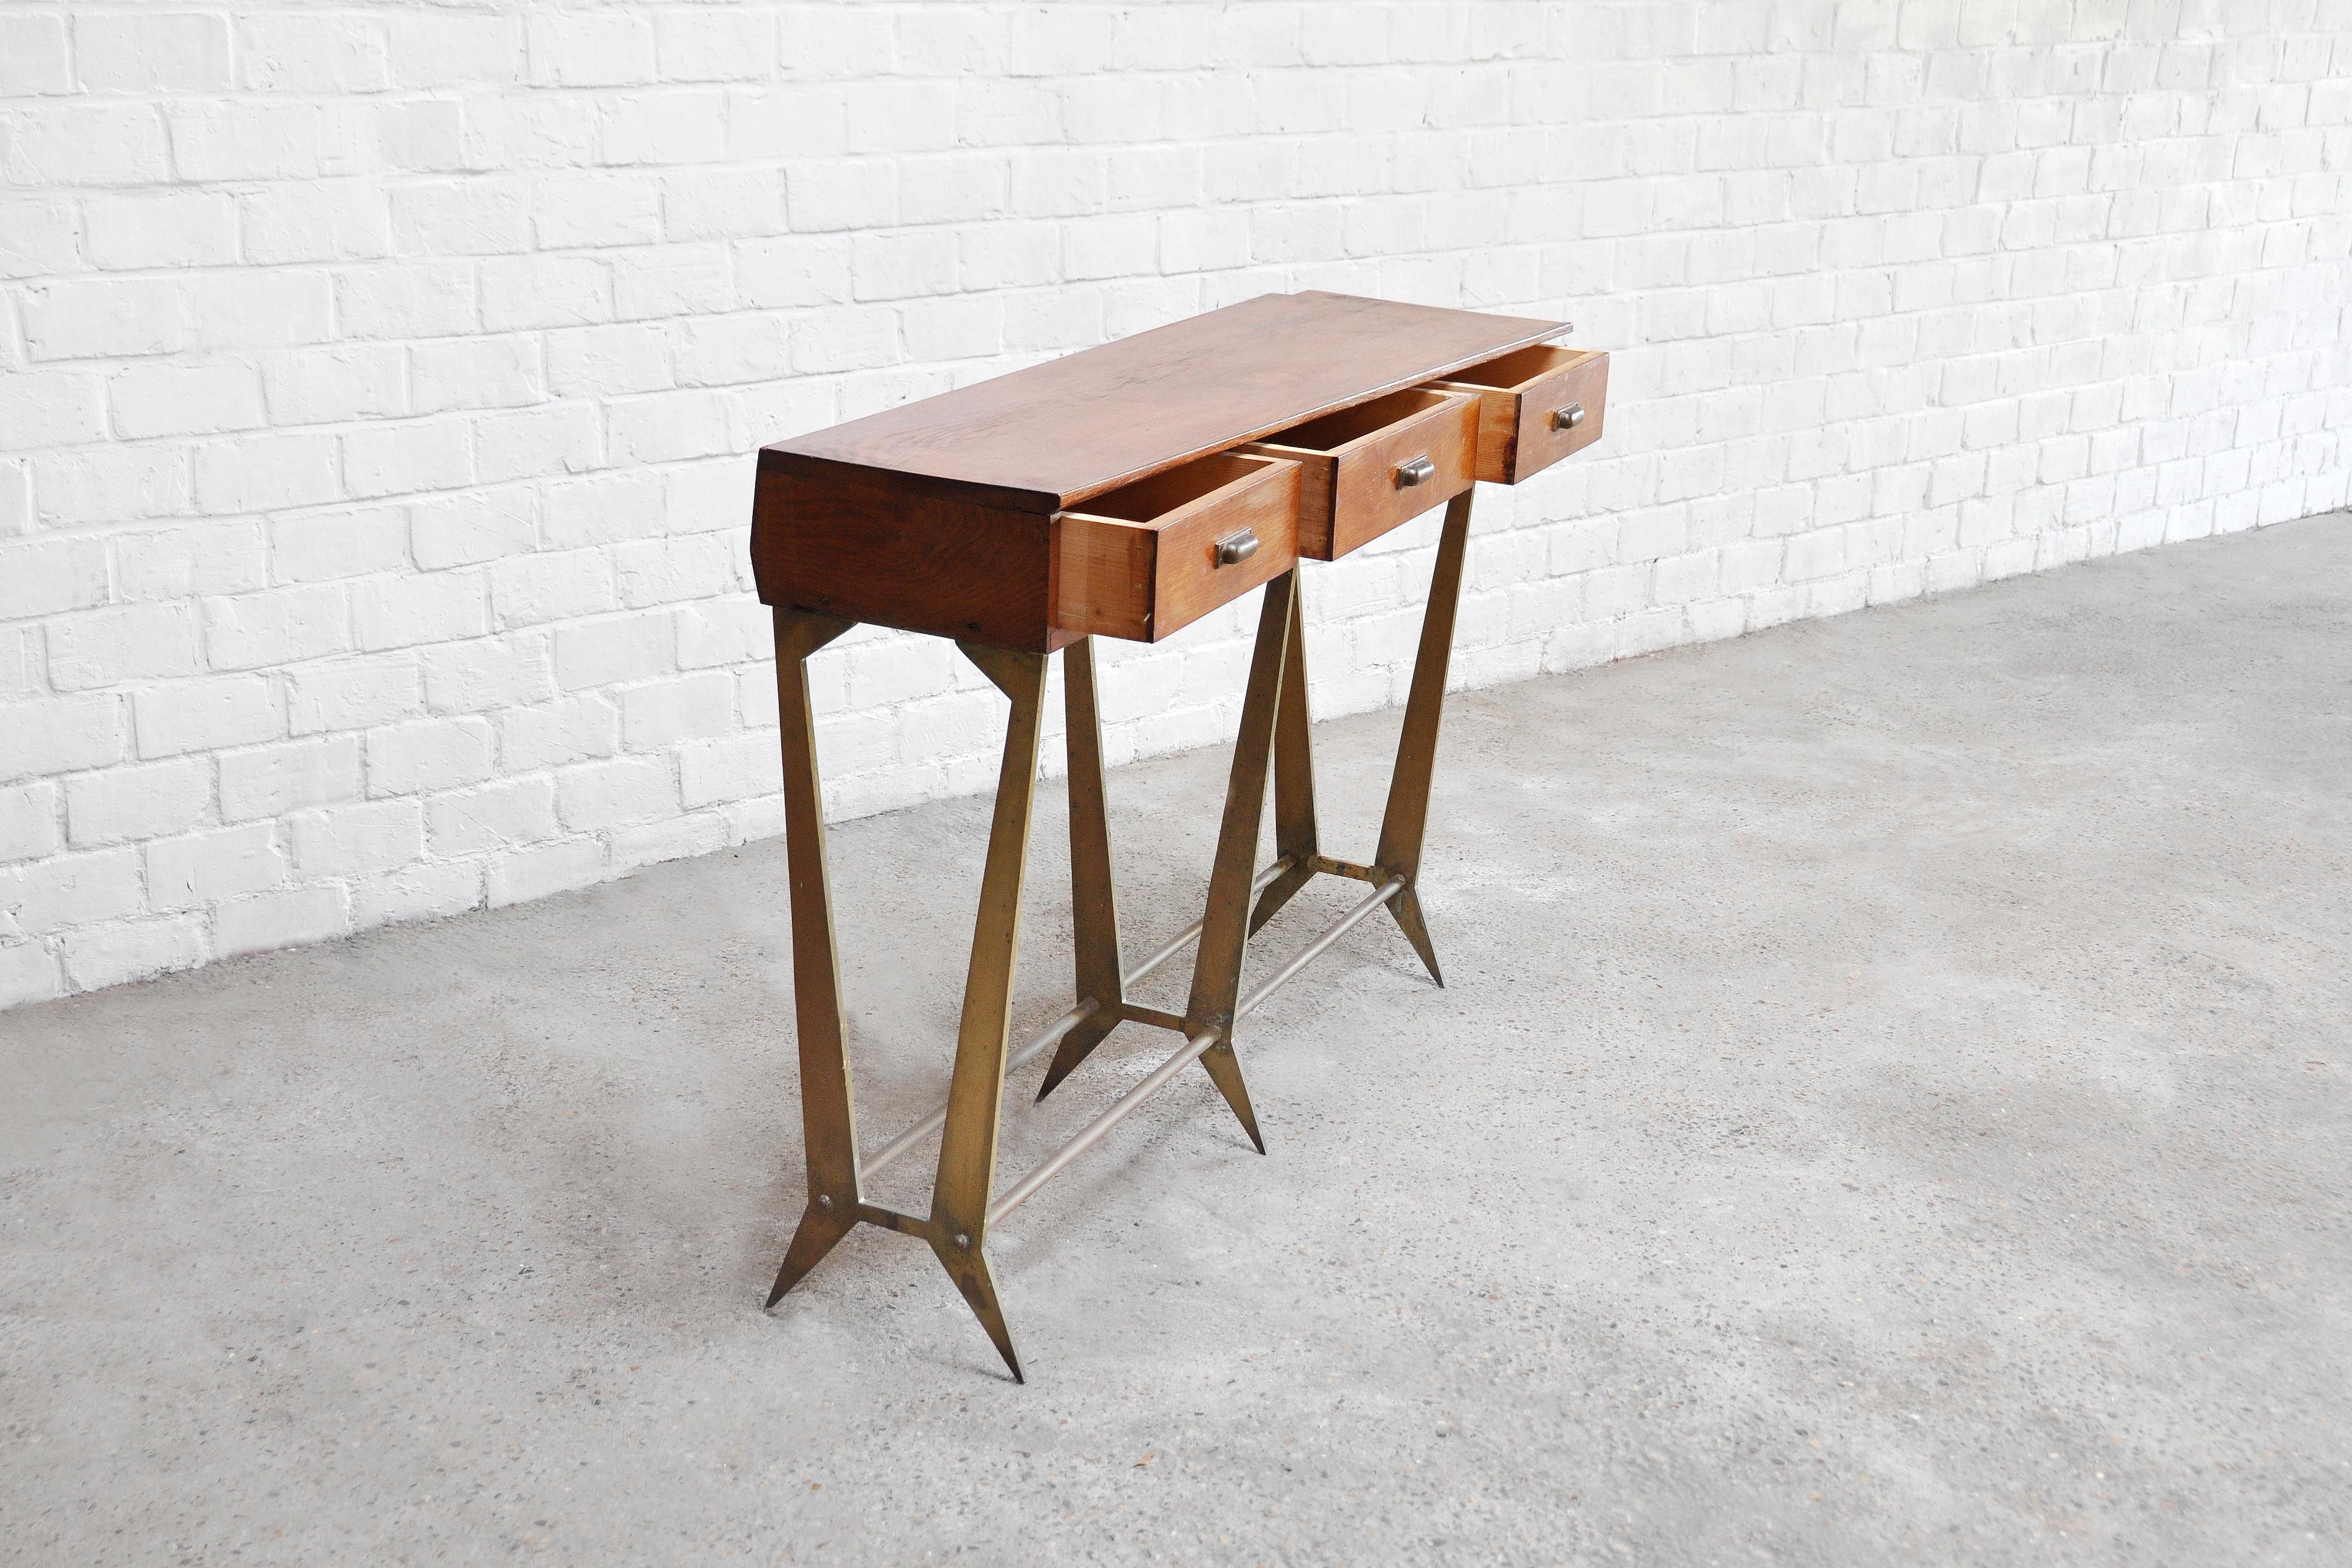 Sculptural Wood & Brass Console Table by Osvaldo Borsani, Italy, 1950s For Sale 2